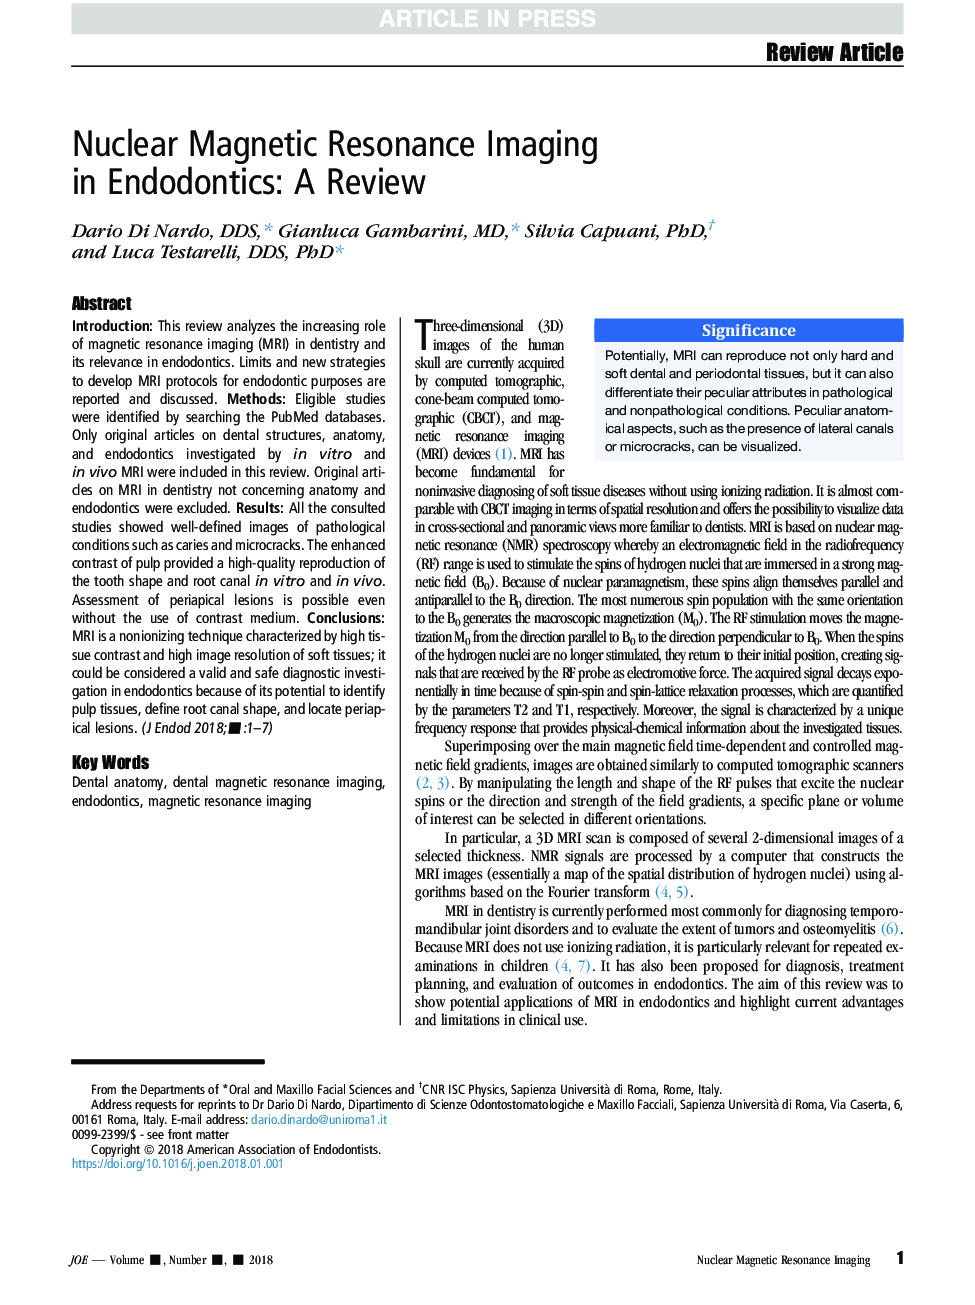 Nuclear Magnetic Resonance Imaging in Endodontics: A Review